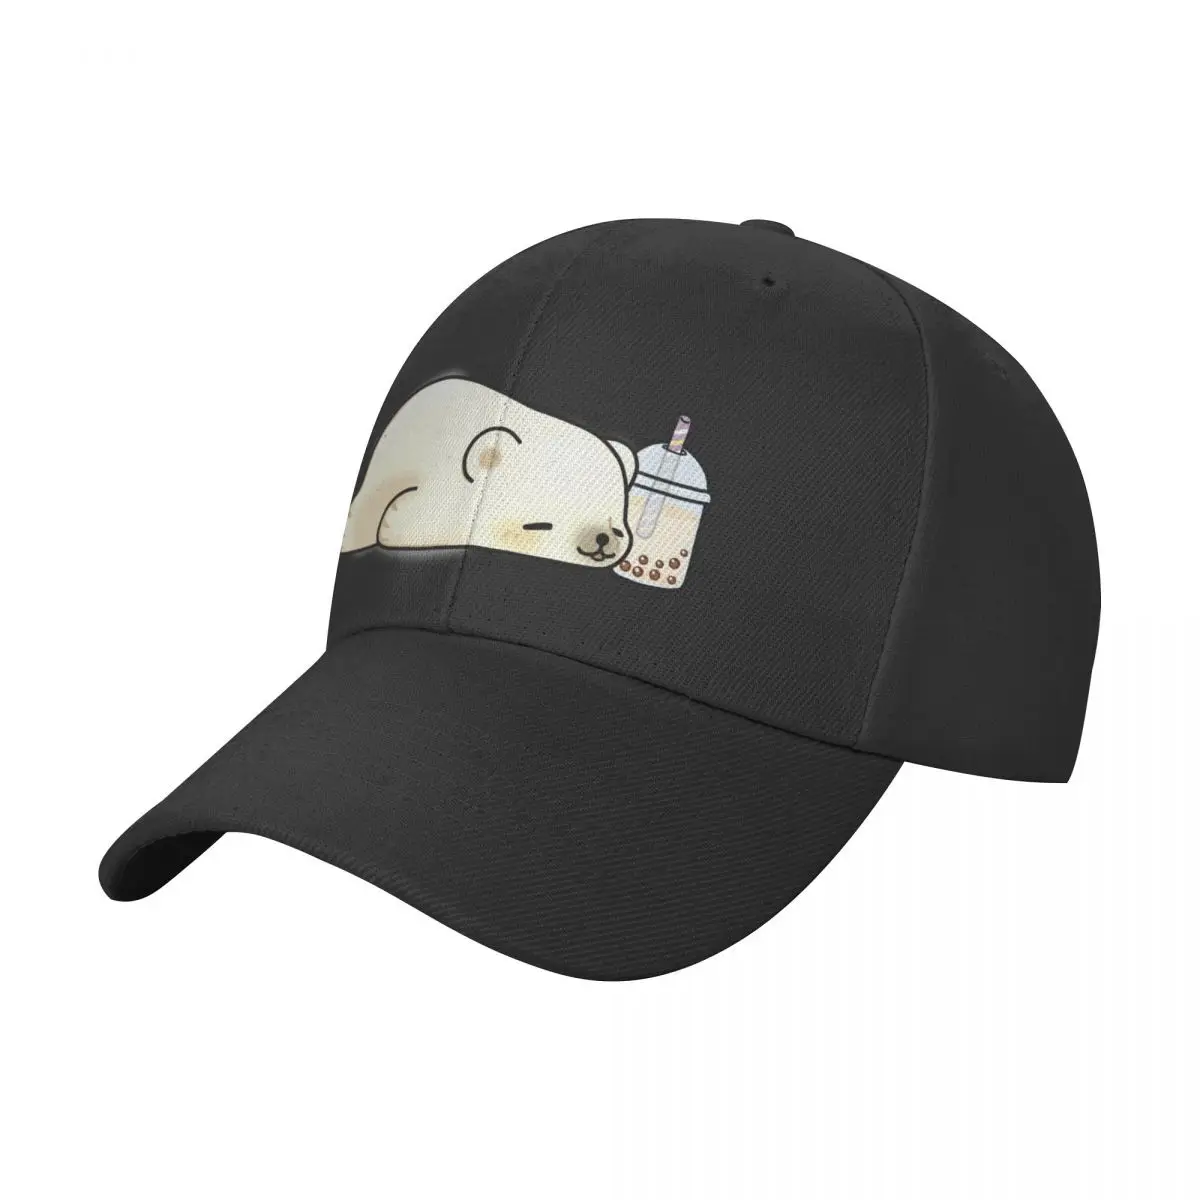 

Little Polar Bear Chilling with it's Boba Tea Baseball Cap Caps fashionable boonie hats funny hat Hat Male Women's